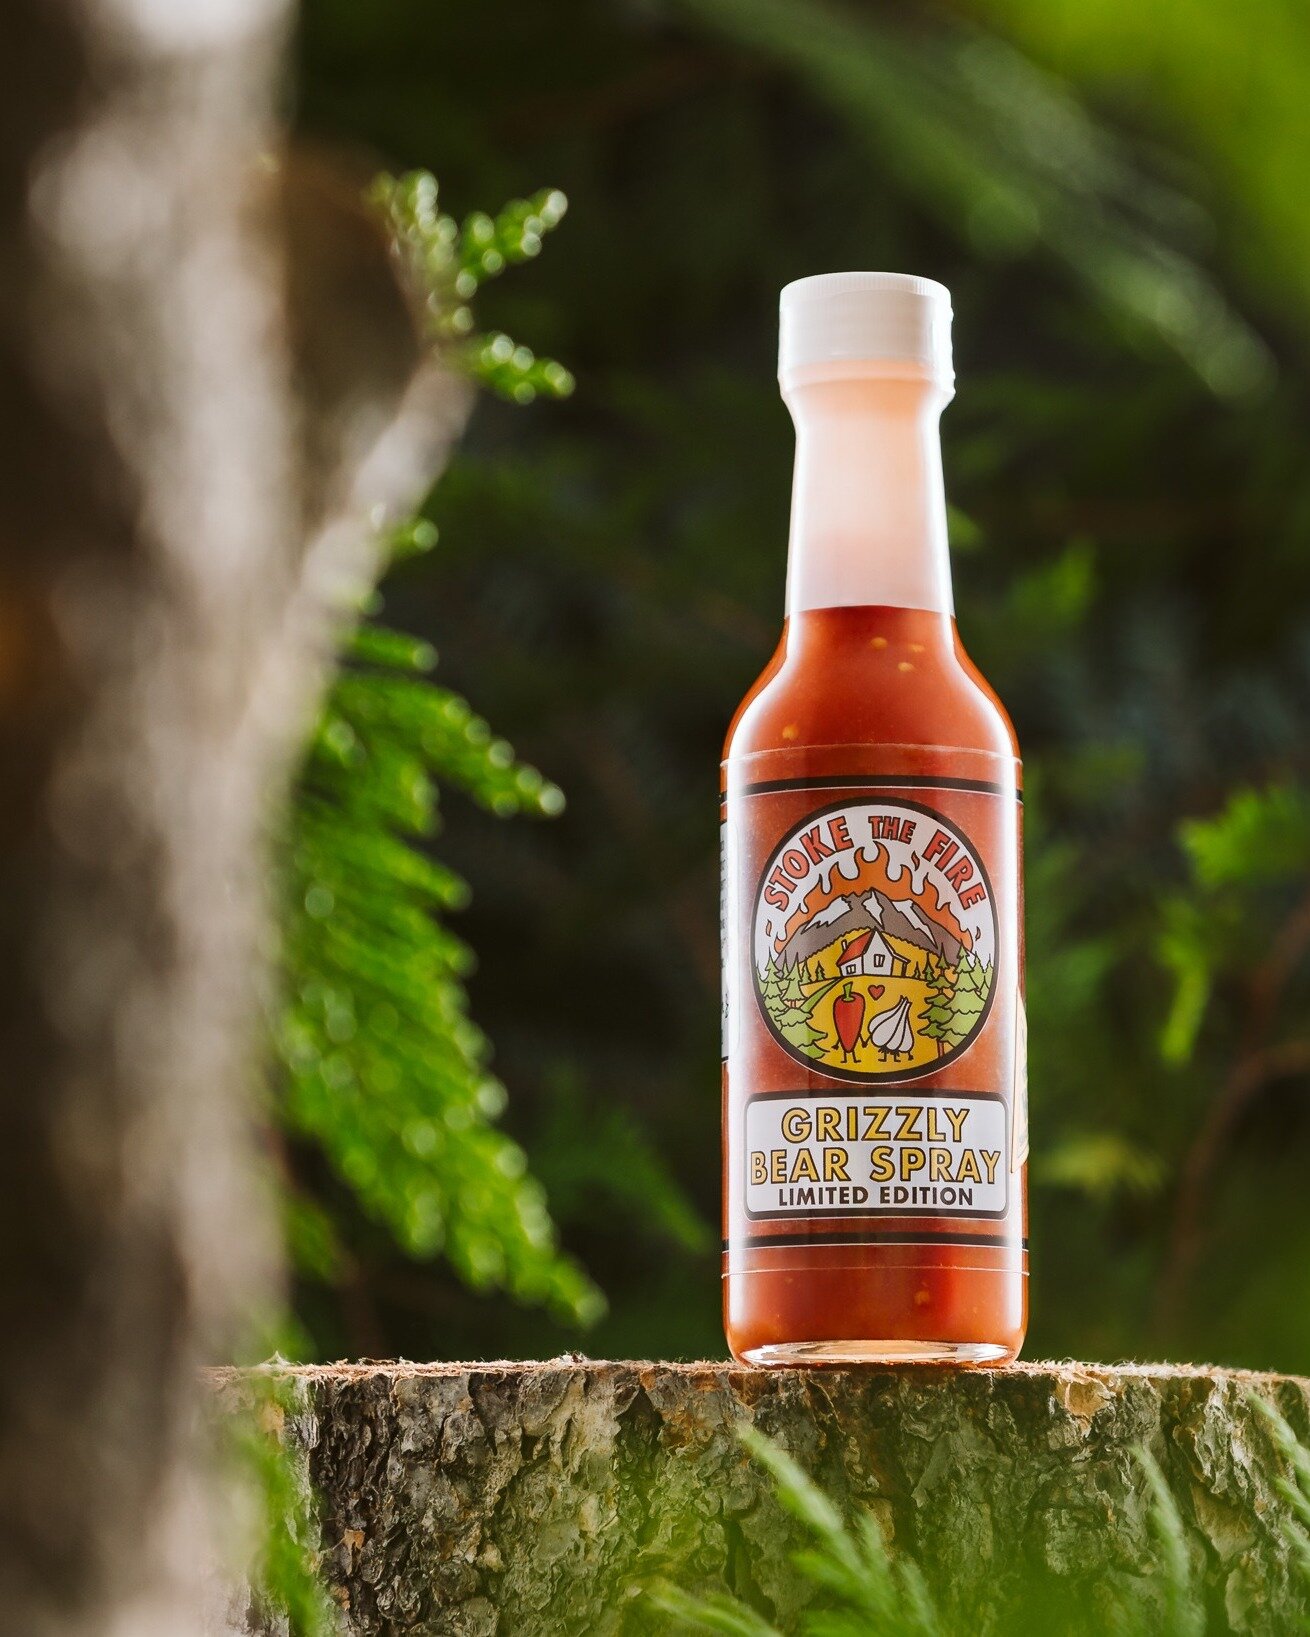 🔥 Happy National Hot Sauce Day! 🌶️✨ Sizzling hot sauce images for @stokethefiresmallbatch and @blazingbillsmoyie. I love helping elevate brands from hero product shots to scroll-stopping stop motions that leave a lasting impression. 📸🔥 Join the c